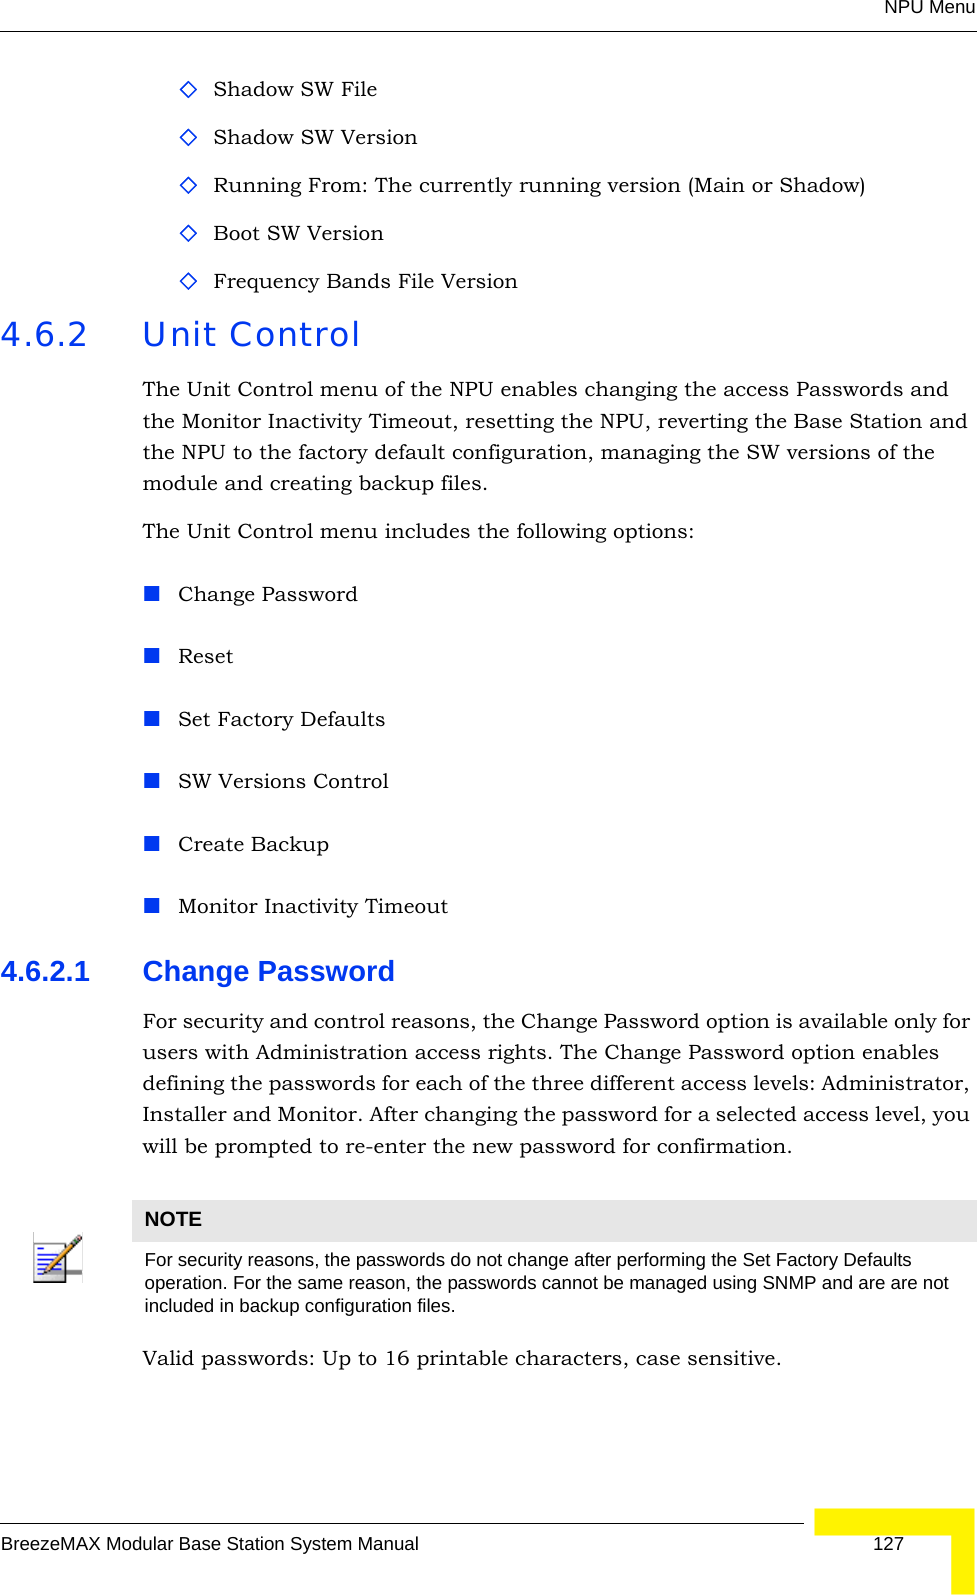 NPU MenuBreezeMAX Modular Base Station System Manual 127Shadow SW FileShadow SW Version Running From: The currently running version (Main or Shadow)Boot SW VersionFrequency Bands File Version4.6.2 Unit ControlThe Unit Control menu of the NPU enables changing the access Passwords and the Monitor Inactivity Timeout, resetting the NPU, reverting the Base Station and the NPU to the factory default configuration, managing the SW versions of the module and creating backup files.The Unit Control menu includes the following options:Change PasswordResetSet Factory DefaultsSW Versions ControlCreate BackupMonitor Inactivity Timeout4.6.2.1 Change PasswordFor security and control reasons, the Change Password option is available only for users with Administration access rights. The Change Password option enables defining the passwords for each of the three different access levels: Administrator, Installer and Monitor. After changing the password for a selected access level, you will be prompted to re-enter the new password for confirmation.Valid passwords: Up to 16 printable characters, case sensitive.NOTEFor security reasons, the passwords do not change after performing the Set Factory Defaults operation. For the same reason, the passwords cannot be managed using SNMP and are are not included in backup configuration files.